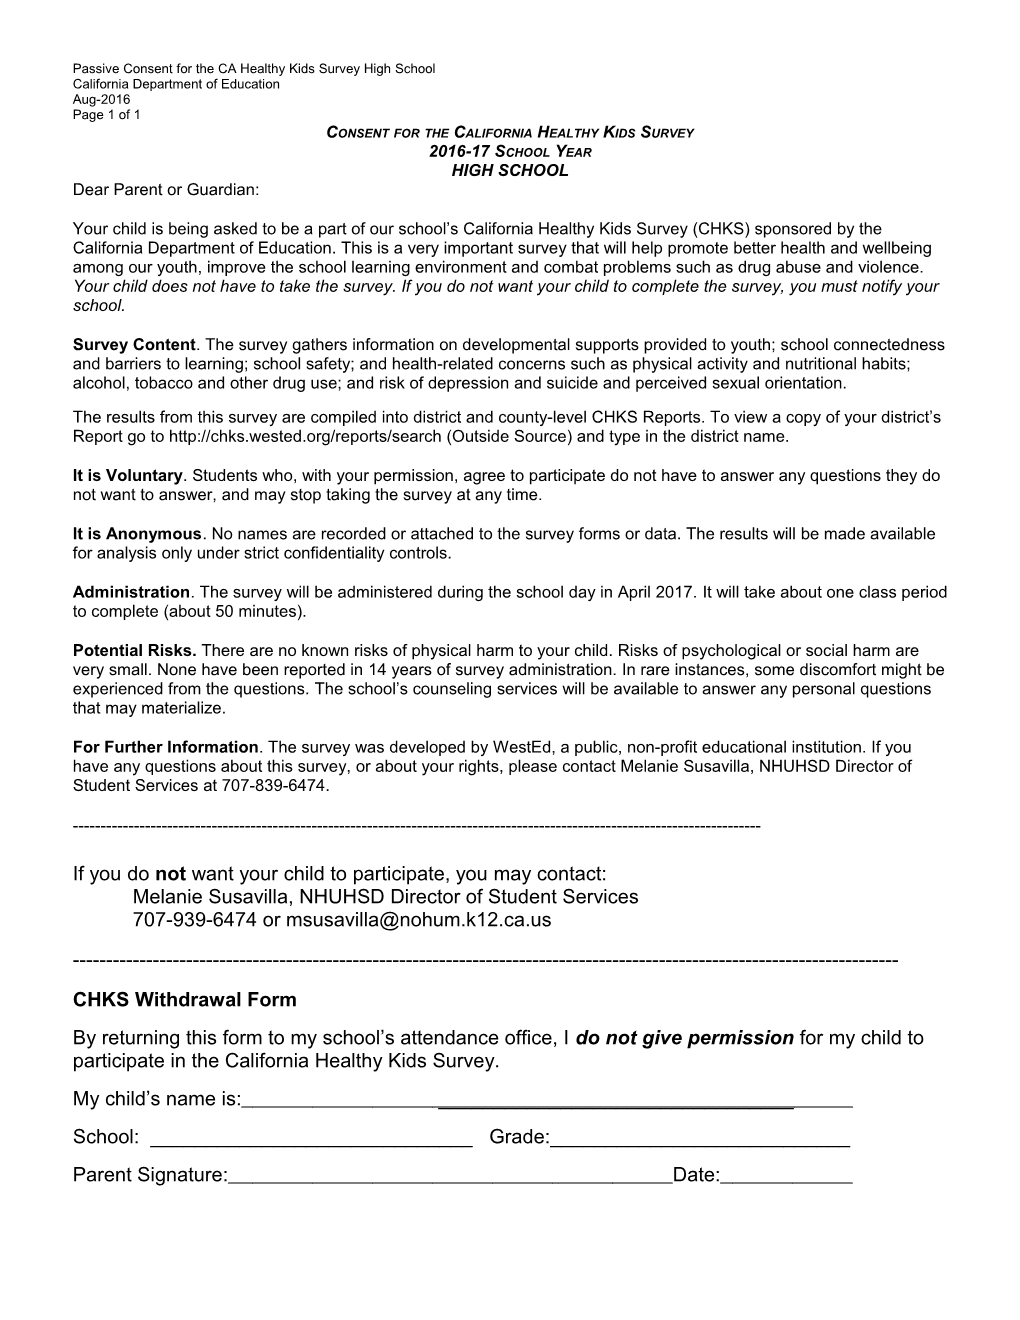 CHKS Active Consent Form High School - Research (CA Dept of Education)